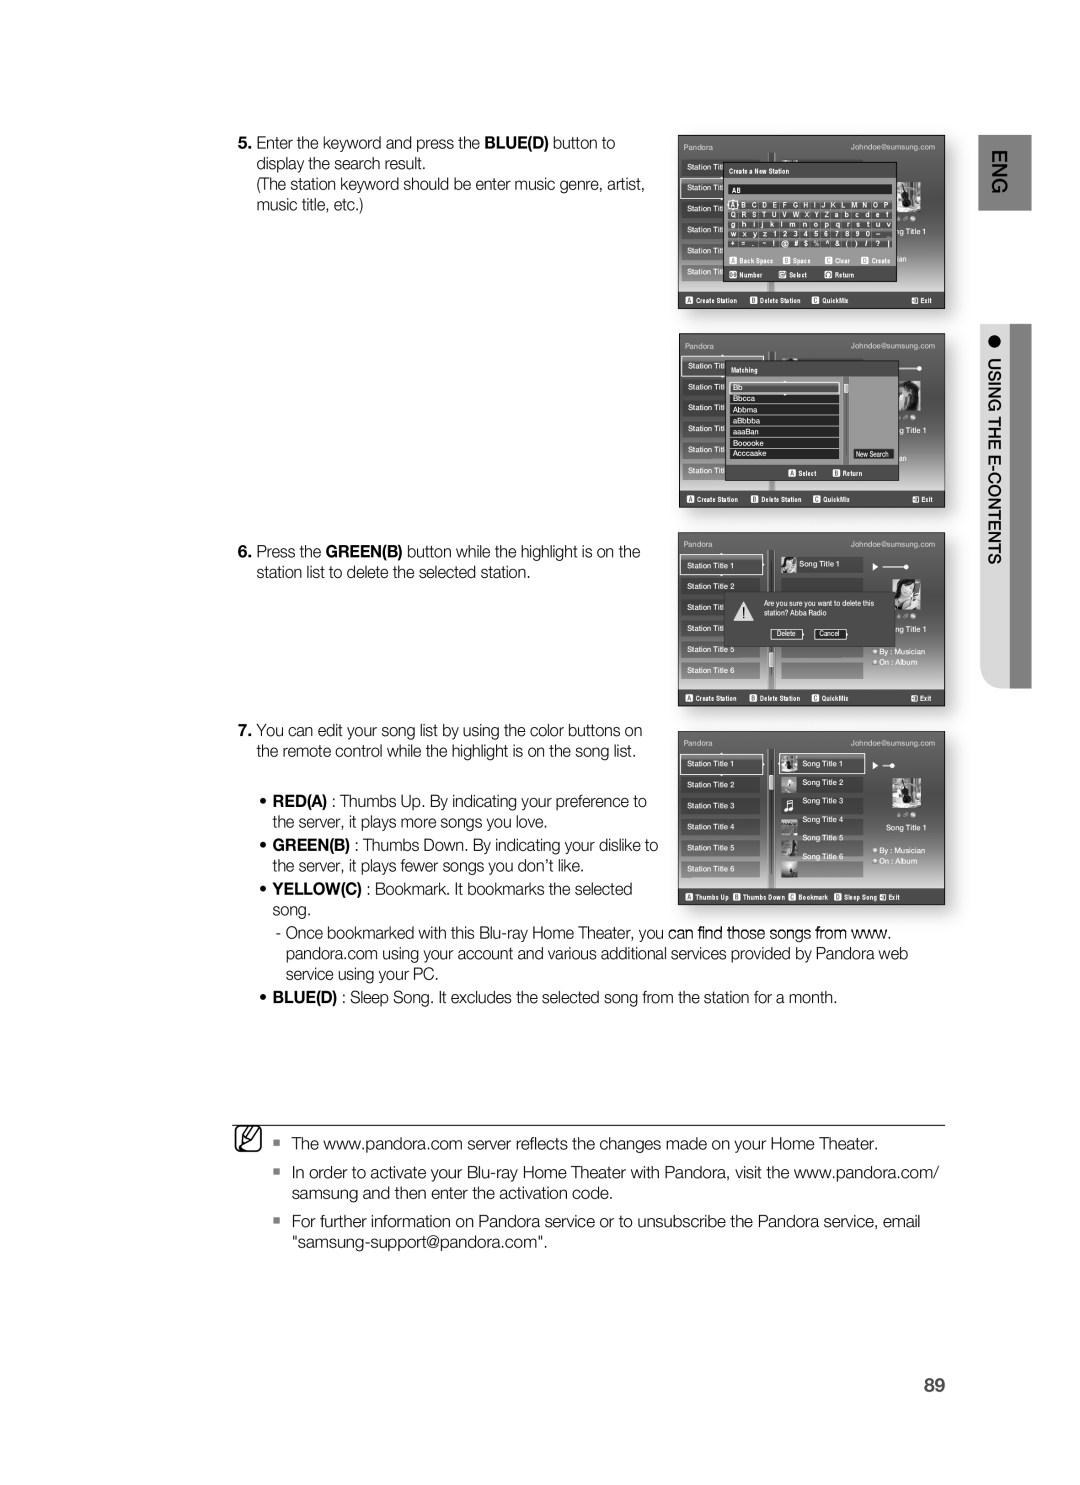 Samsung HT-BD3252 user manual the server, it plays more songs you love 